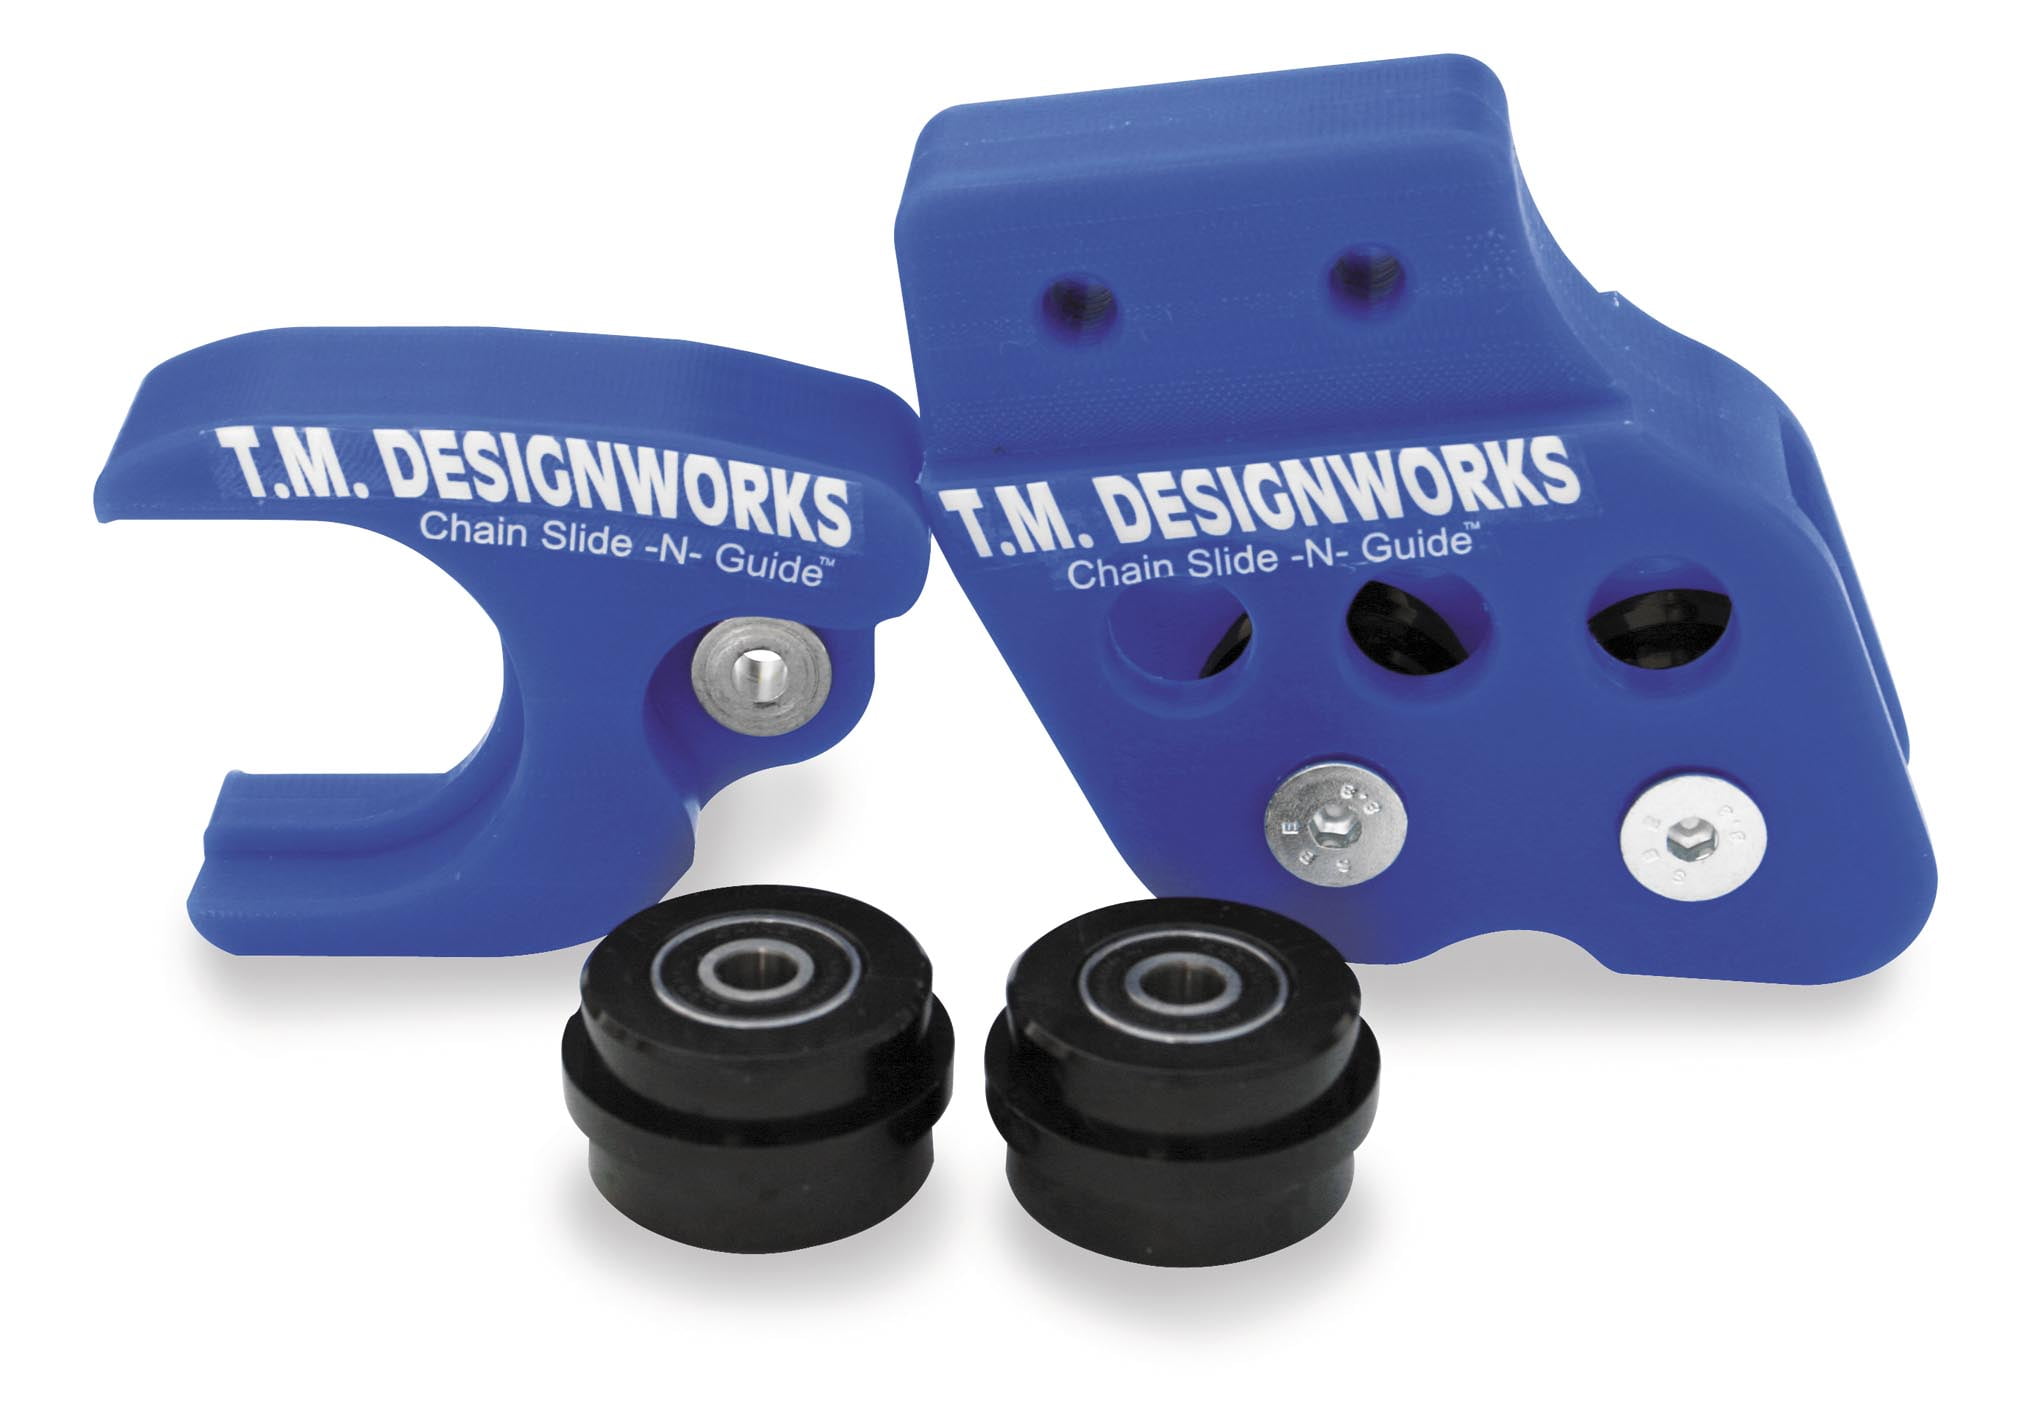 Designworks Rear Chain Guide And Solid Powerlip Wear Pad RCG-007-BK T.M